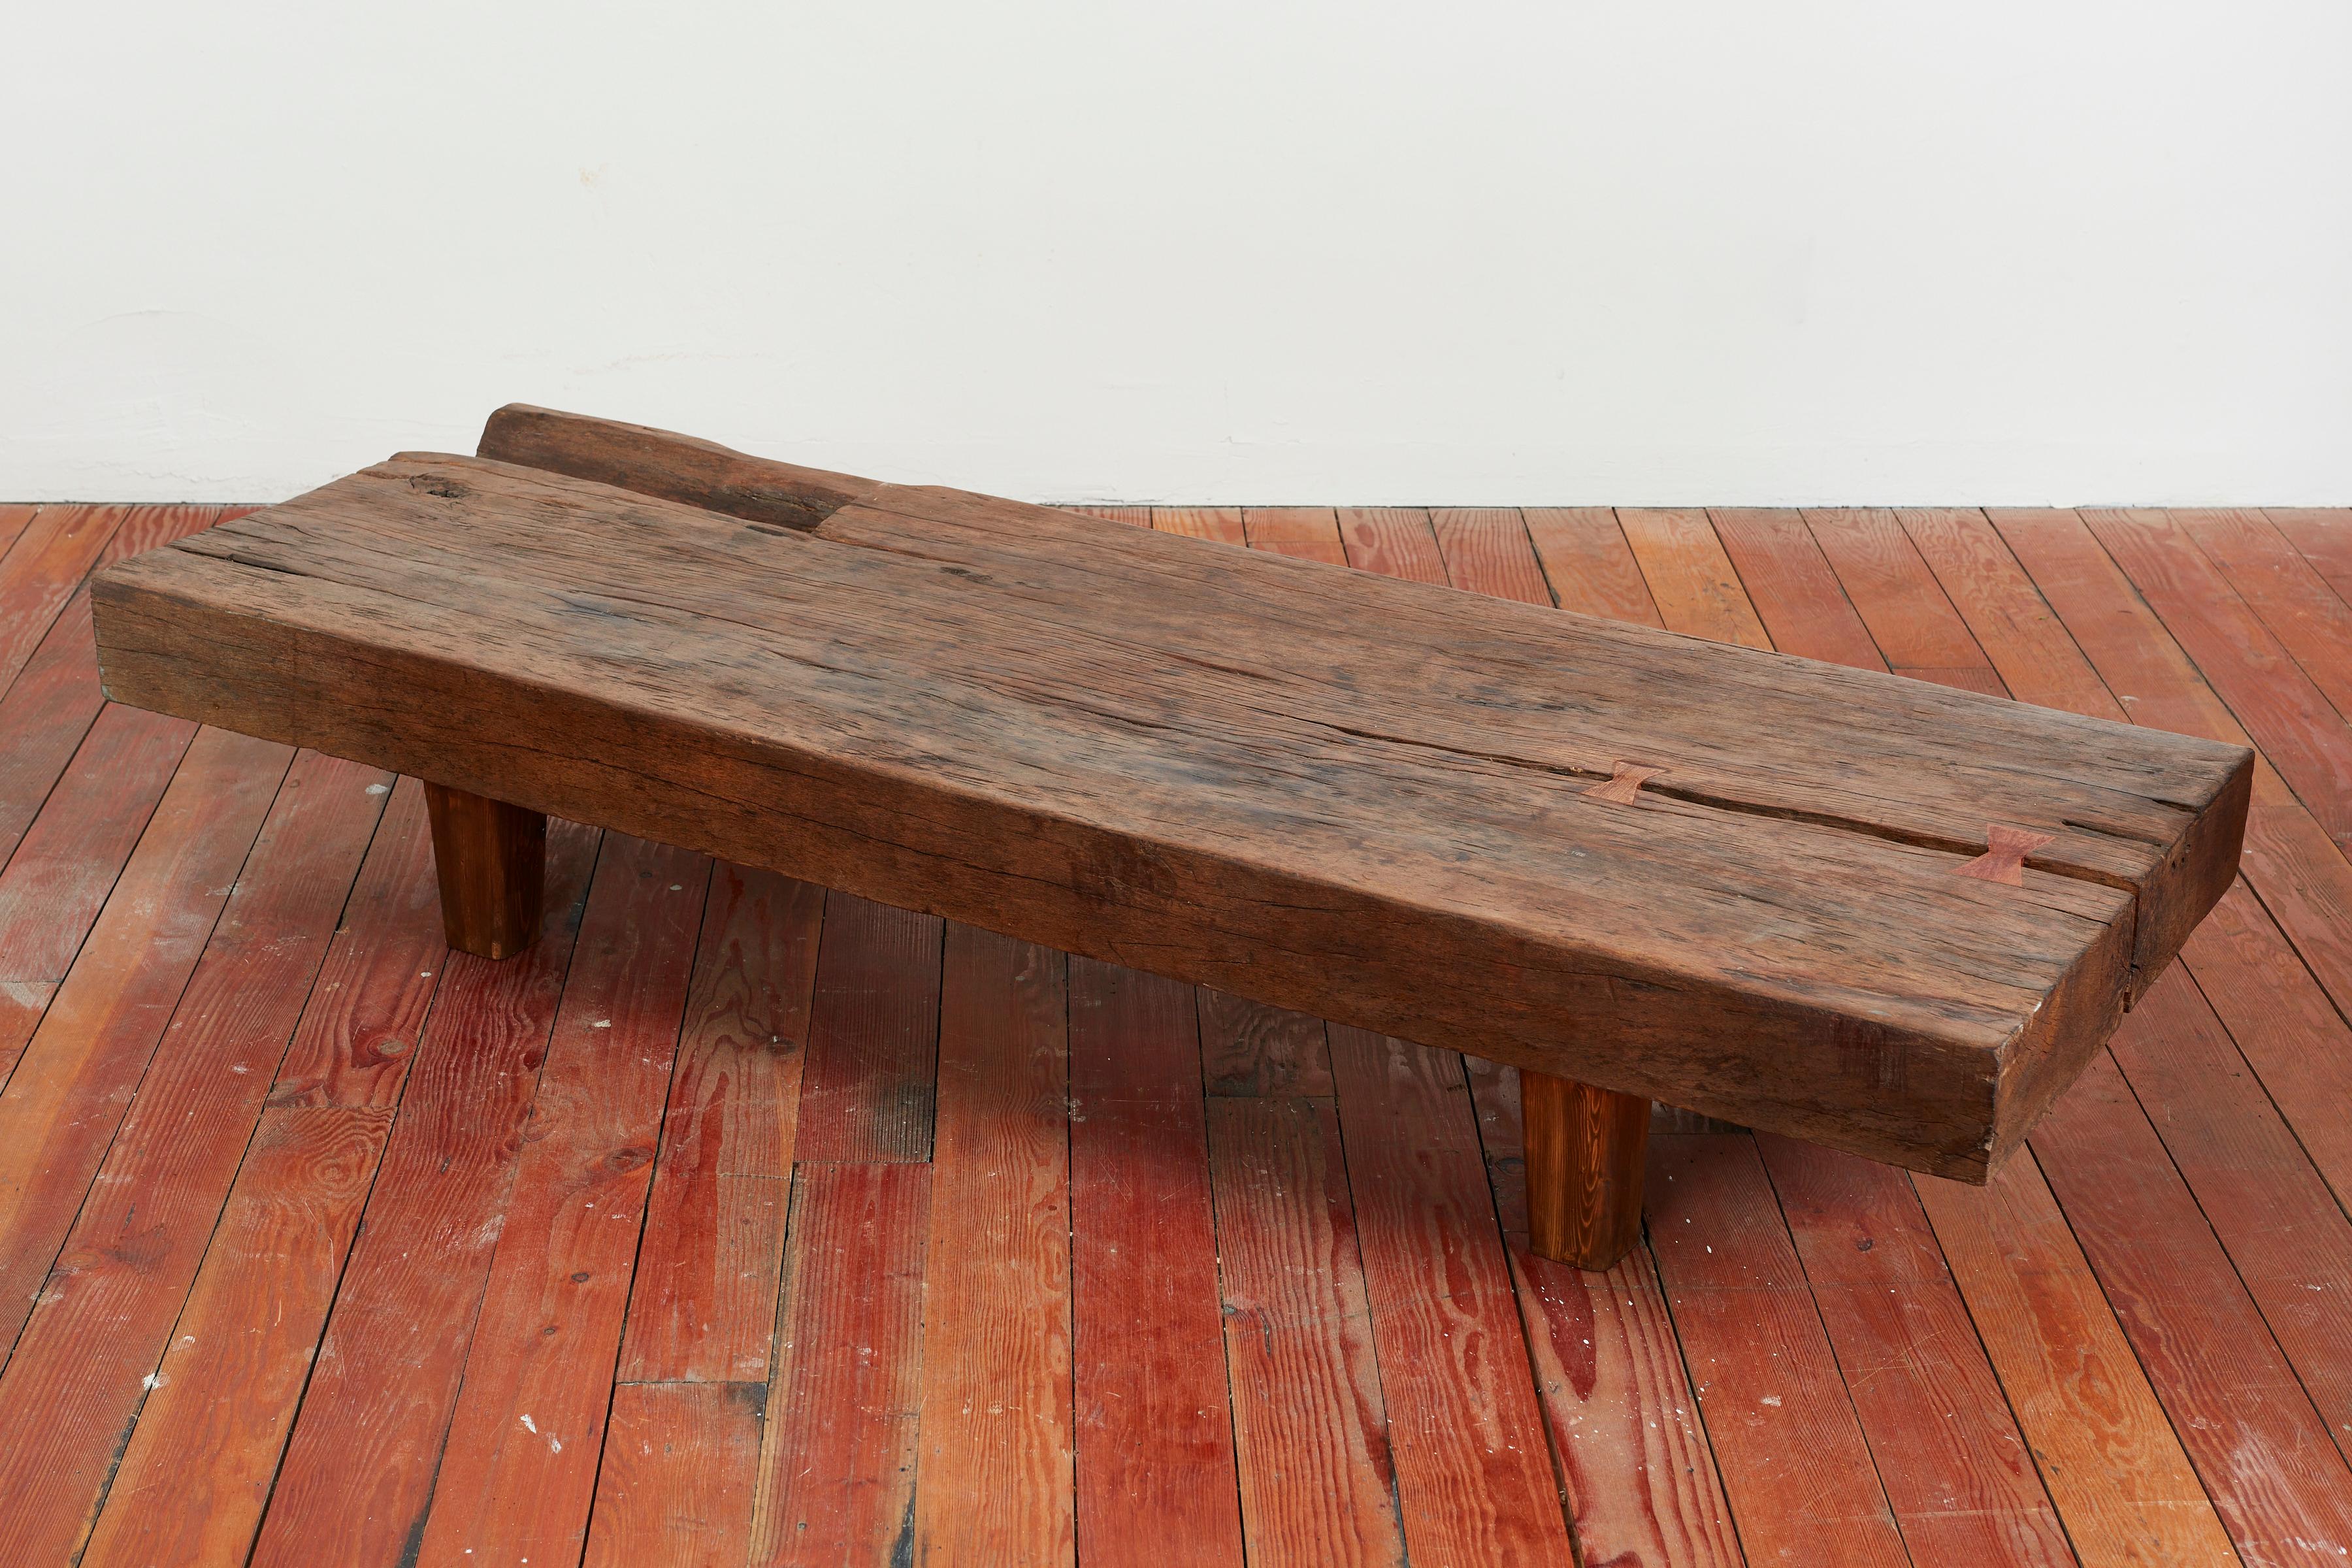 Thick slab of teak wood bench or coffee table with incredible butterfly joints and character to the wood. 
Fabulous piece.